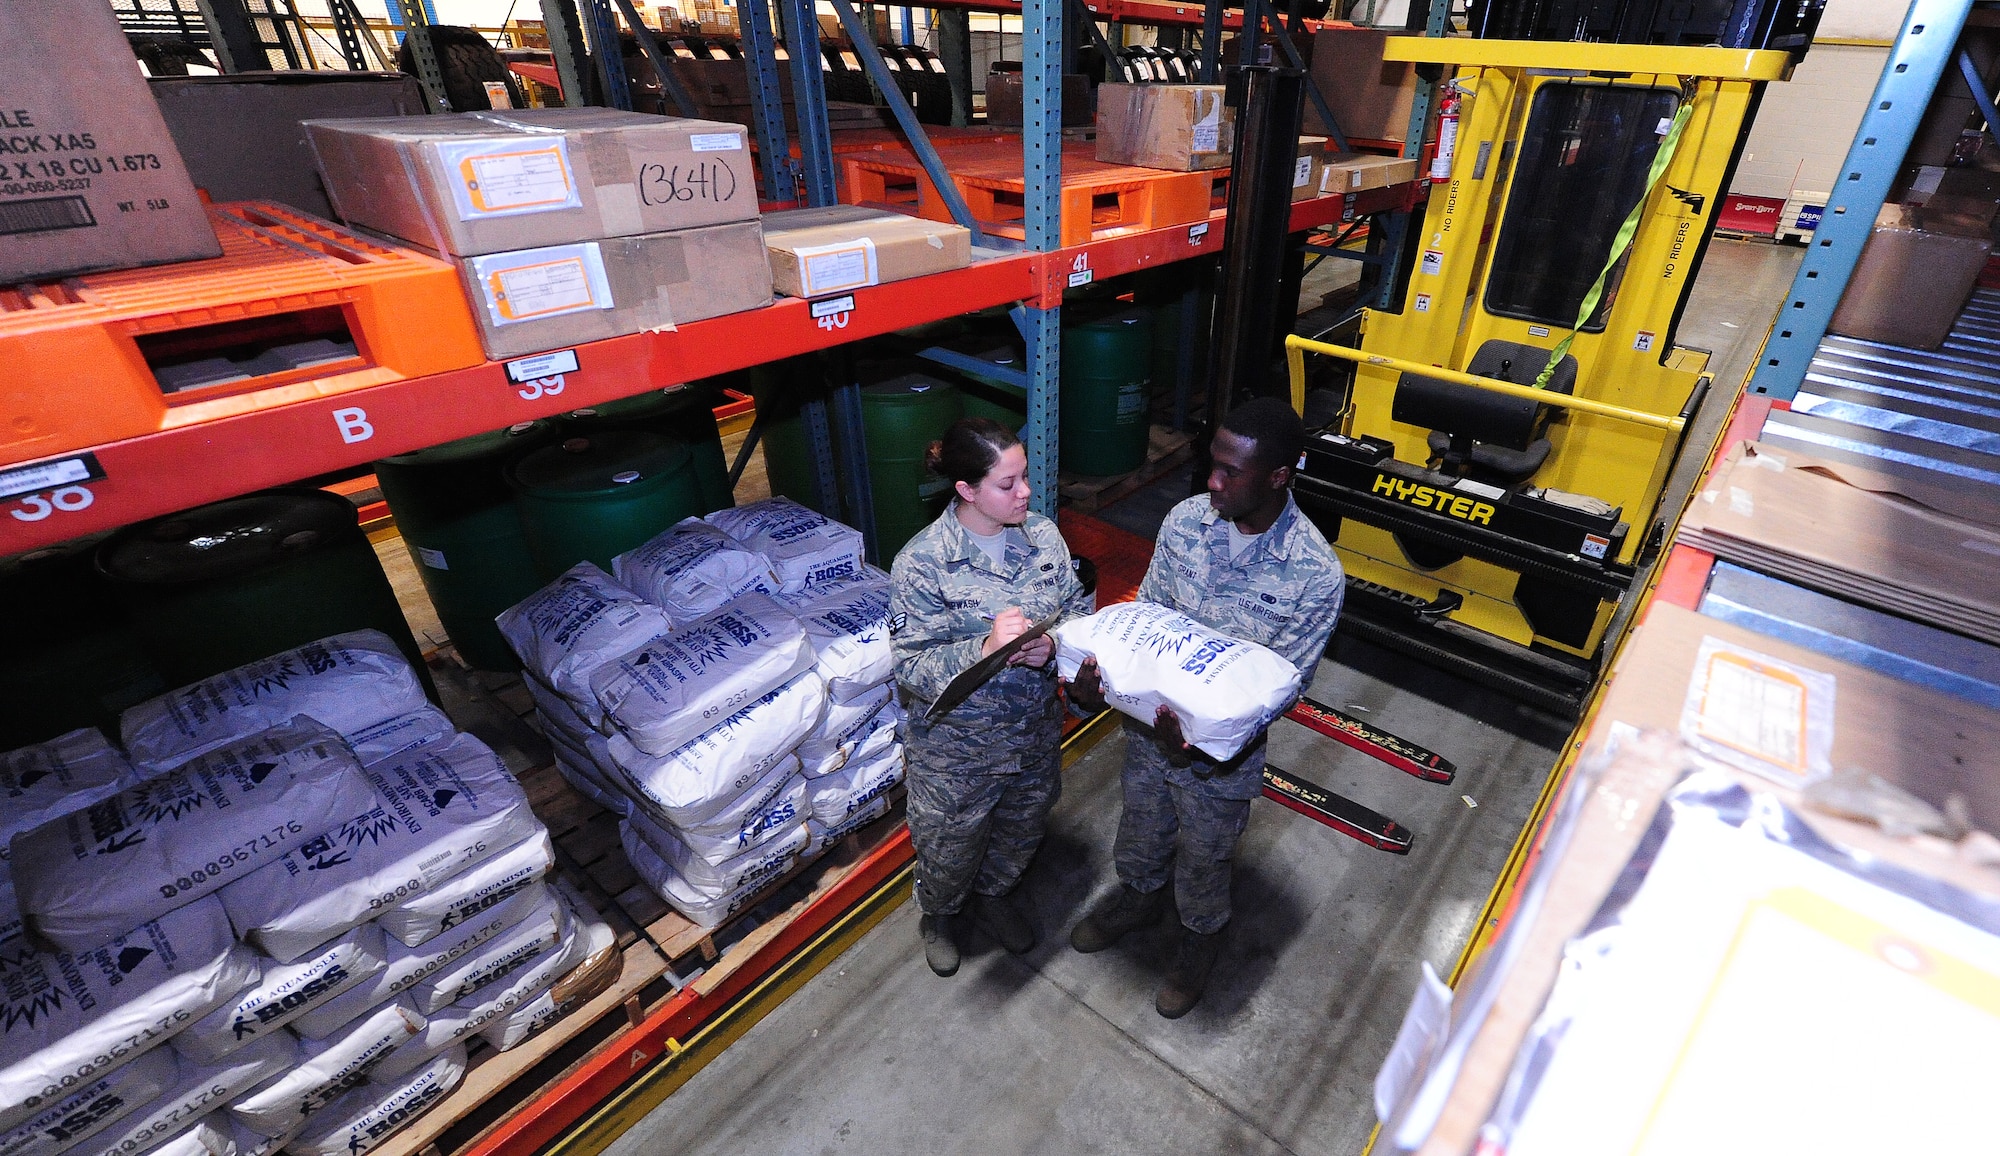 Senior Airman Stephanie Shipwash and Airman 1st Class Terrell Grant and, both 509th Logistics Readiness Squadron central storage journeymen, verify the stock numbers of warehouse items prior to loading it onto a hyster to support a customer request at Whiteman Air Force Base, Mo., June 25, 2013. Checking stock numbers helps central storage technicians ensure they have the right items before handing them out to customers. (U.S. Air Force photo by Staff Sgt. Nick Wilson/Released)